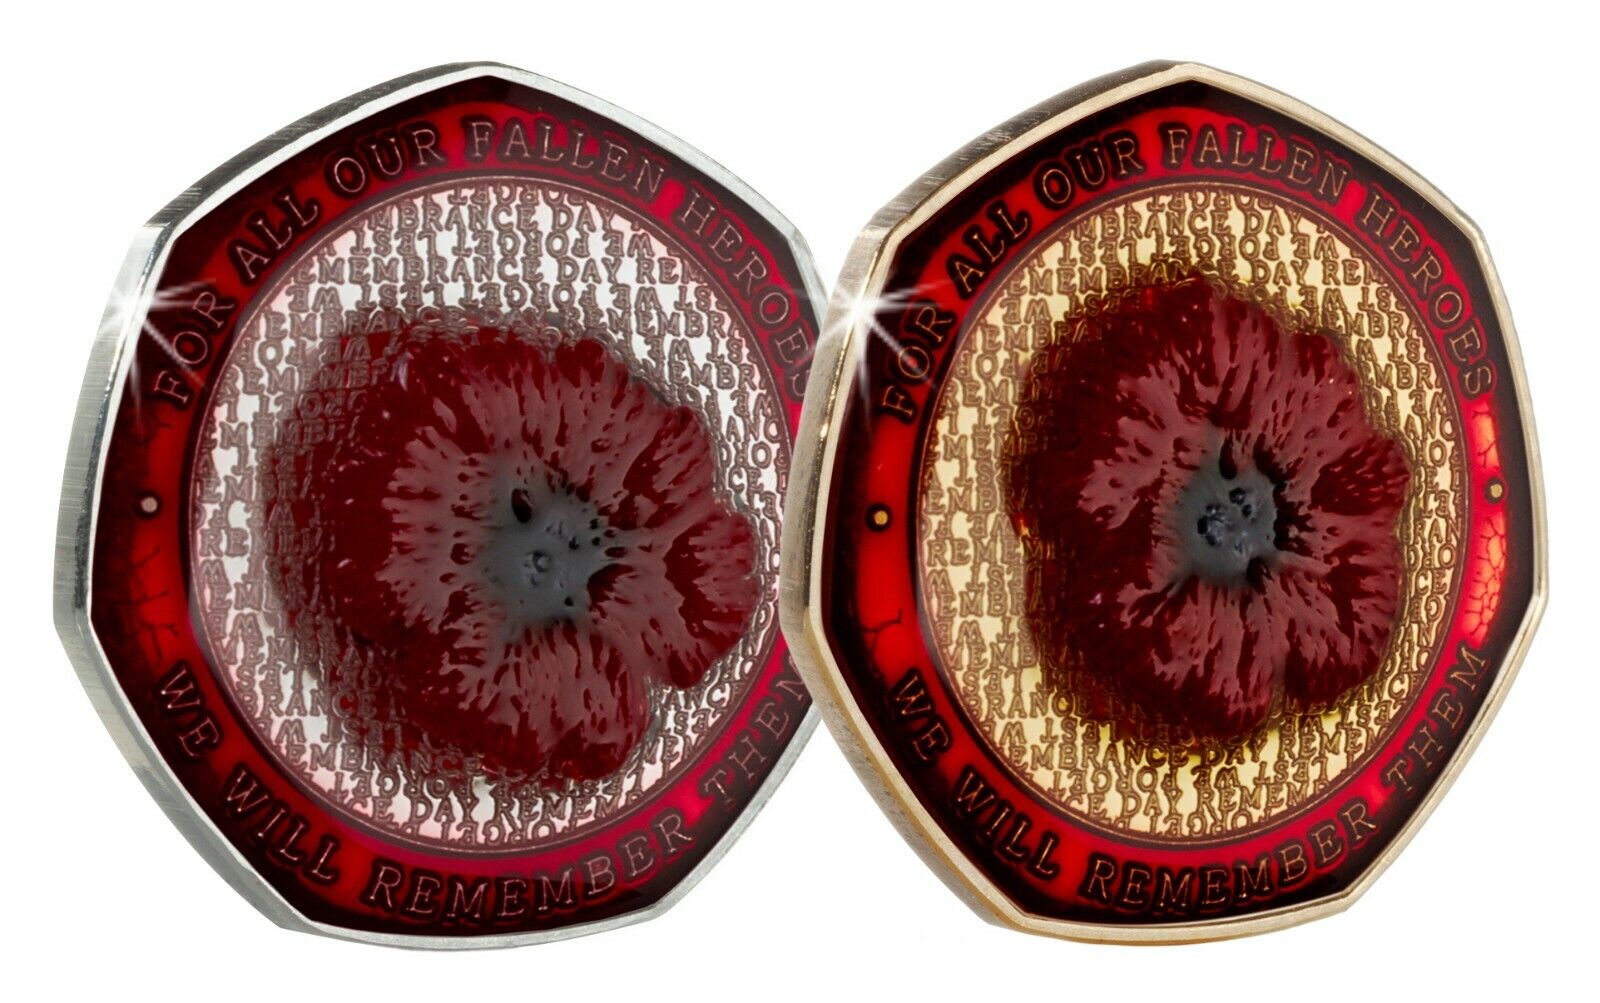 Pair of Armistice/Remembrance Commemoratives with Embroidered Poppies & Enamel